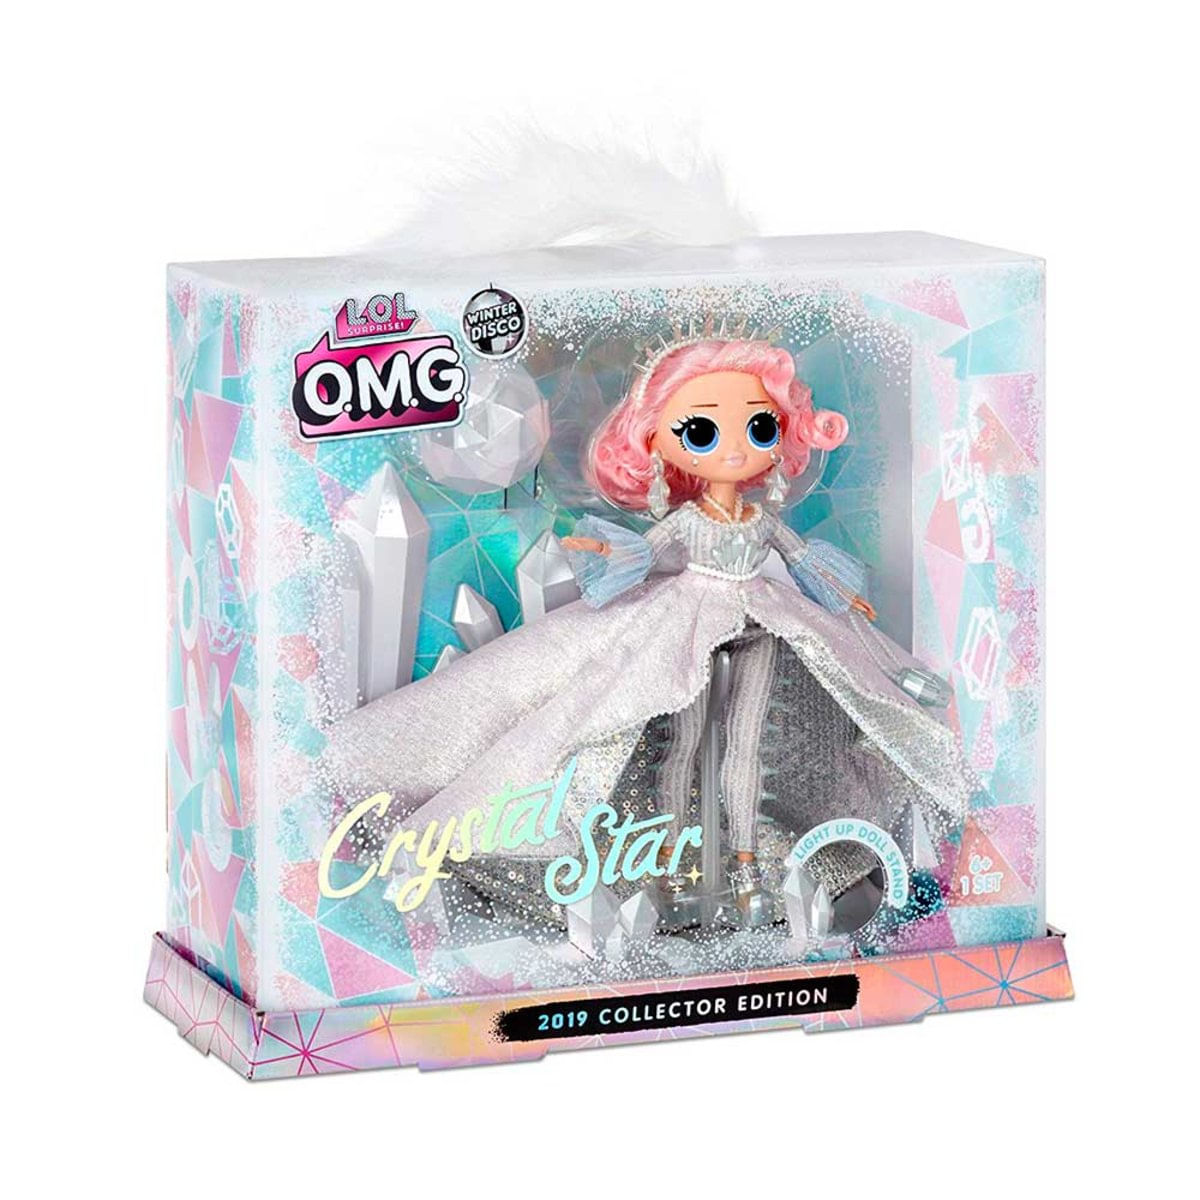 MP20722599_LOL-Surprise-OMG-Crystal-Star-Collector-Edition---Candide_2_Zoom